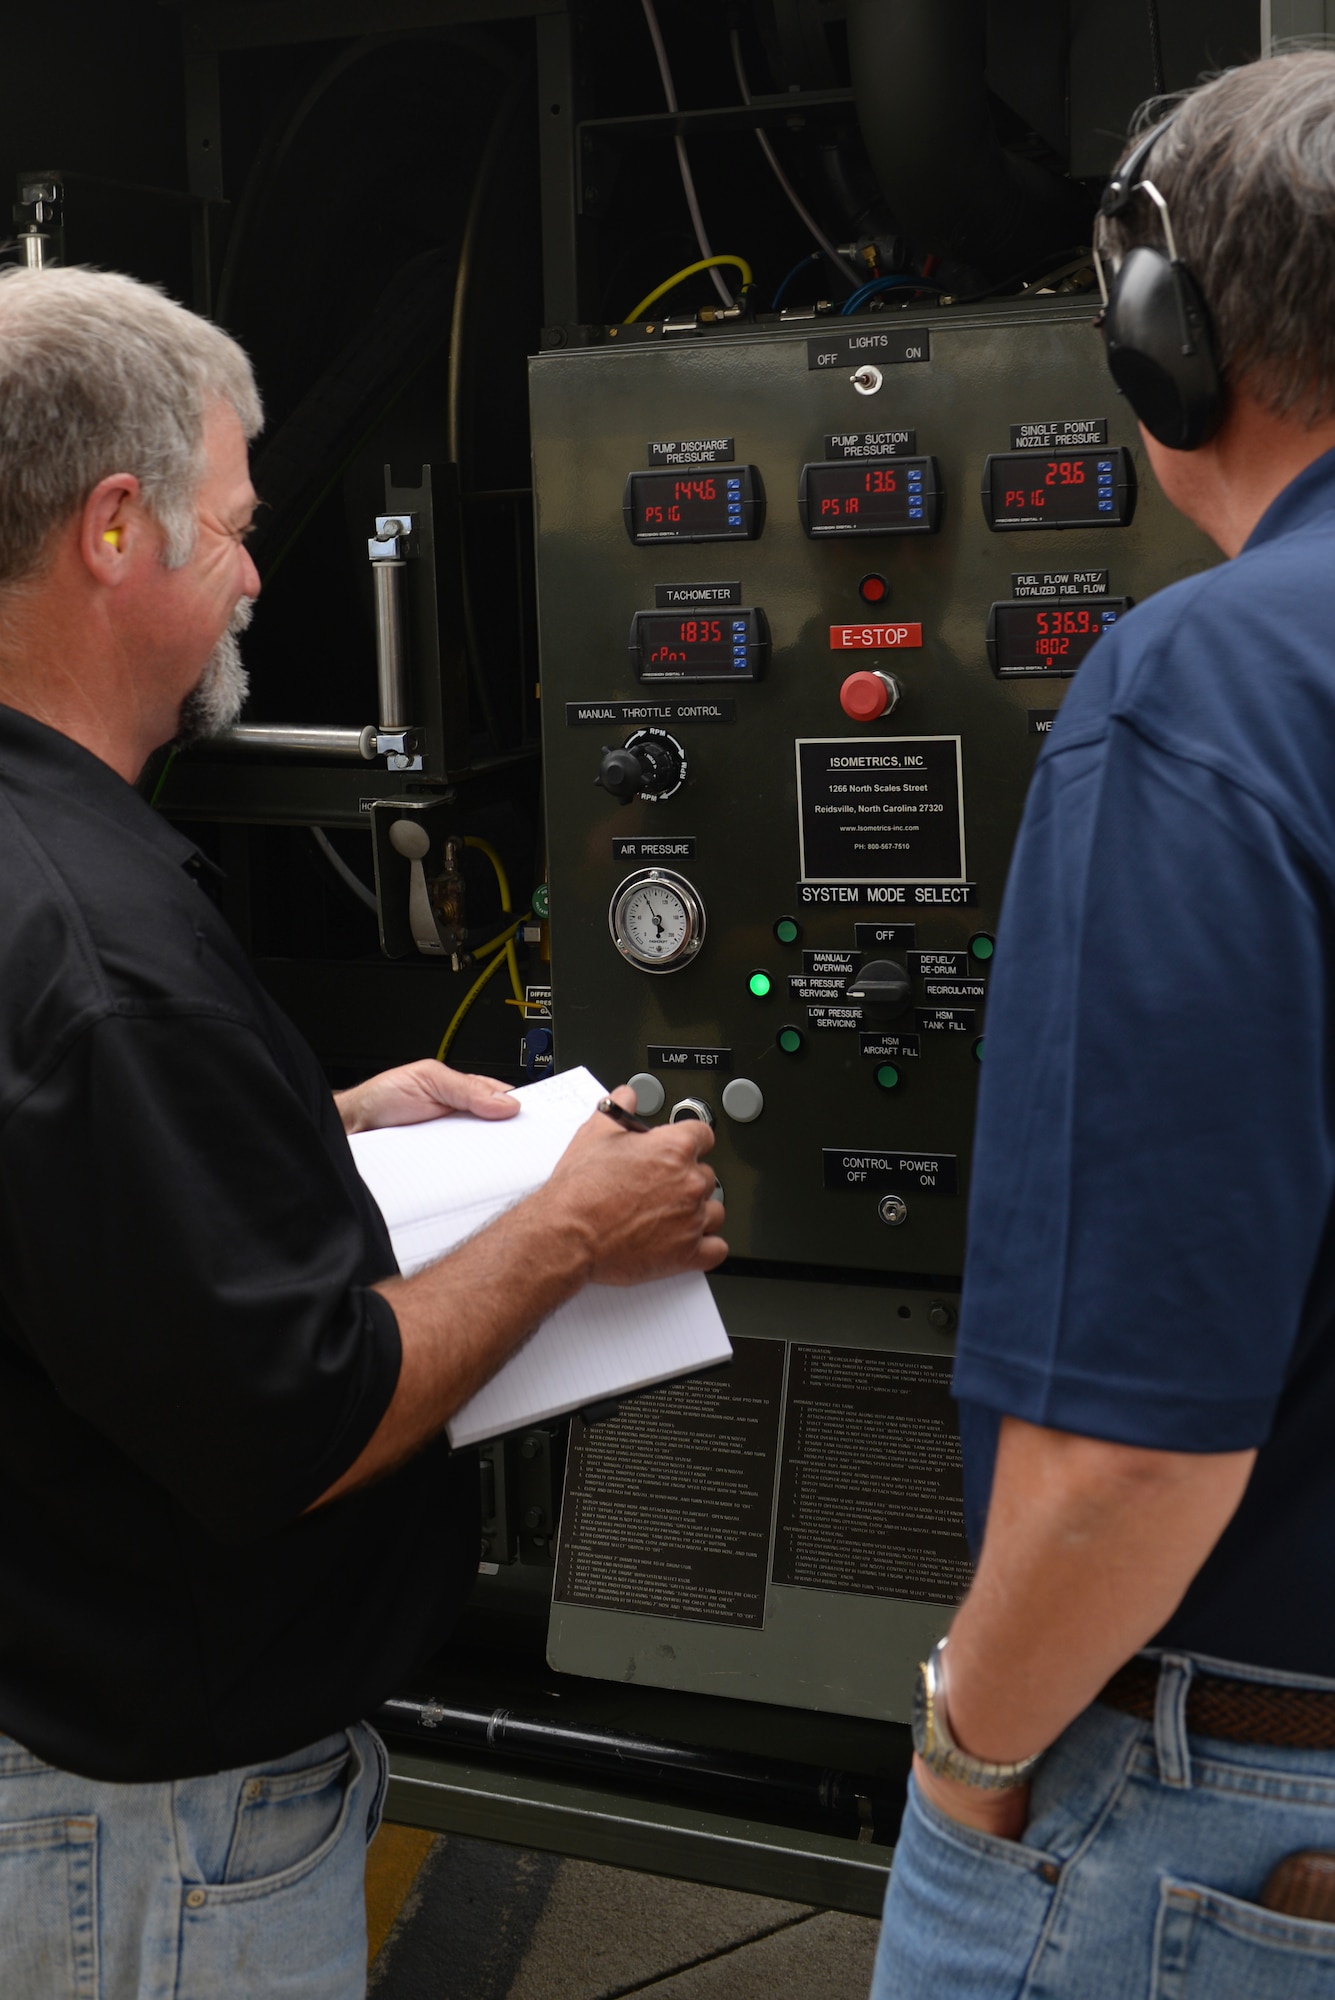 Mike Nelson (left), Air Force Petroleum Agency operations director, and Greg Clay (right), AFPET liaison for Warner Robins Depot, survey gauges on the new Isometrics R-11 Refueler’s panel, May 17, 2016, at Seymour Johnson Air Force Base, North Carolina. The high and low pressure levels were tested and tracked while refueling F-15E Strike Eagles and KC-135 Stratotankers. (U.S. Air Force photo by Airman 1st Class Ashley Williamson)